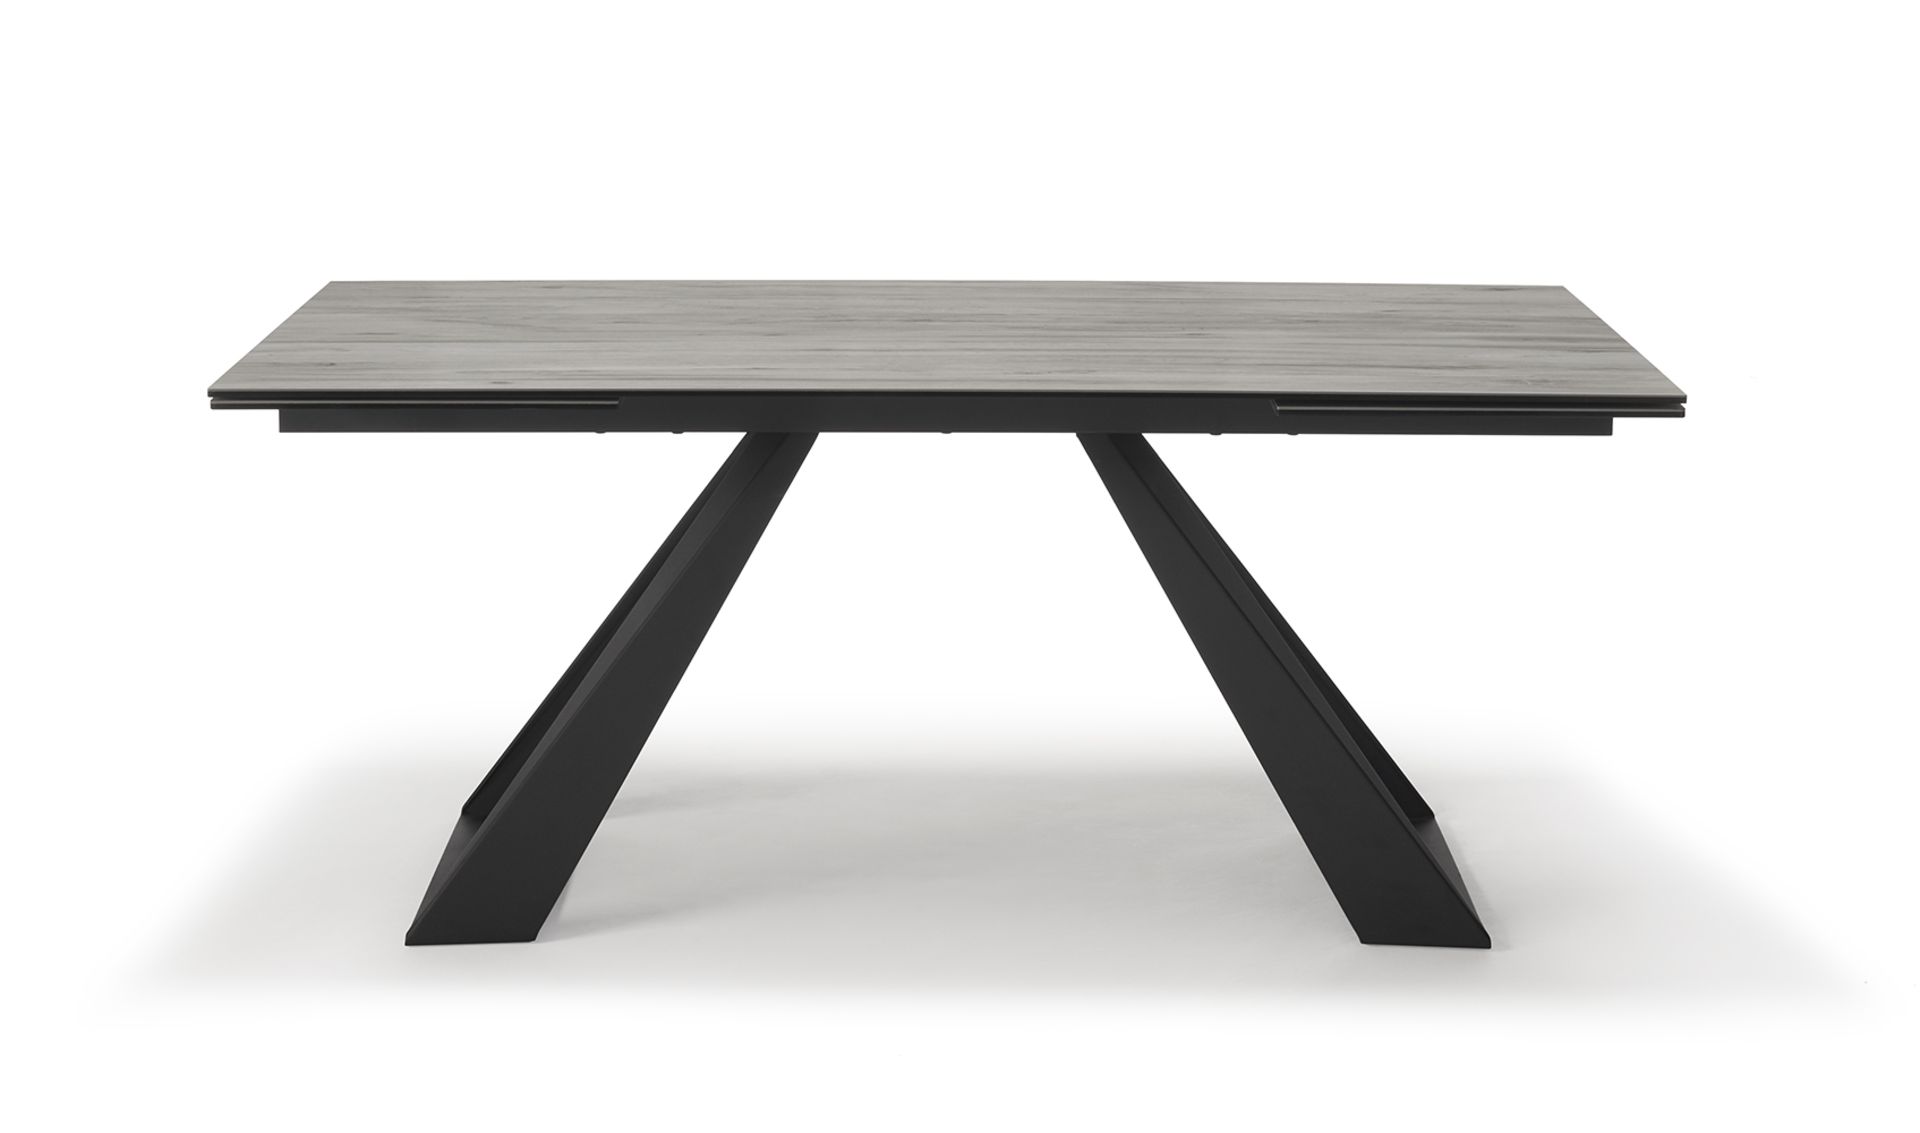 Spartan Dining Table by Kesterport The Spartan Dining Table is part of a sophisticated collection of - Bild 3 aus 4